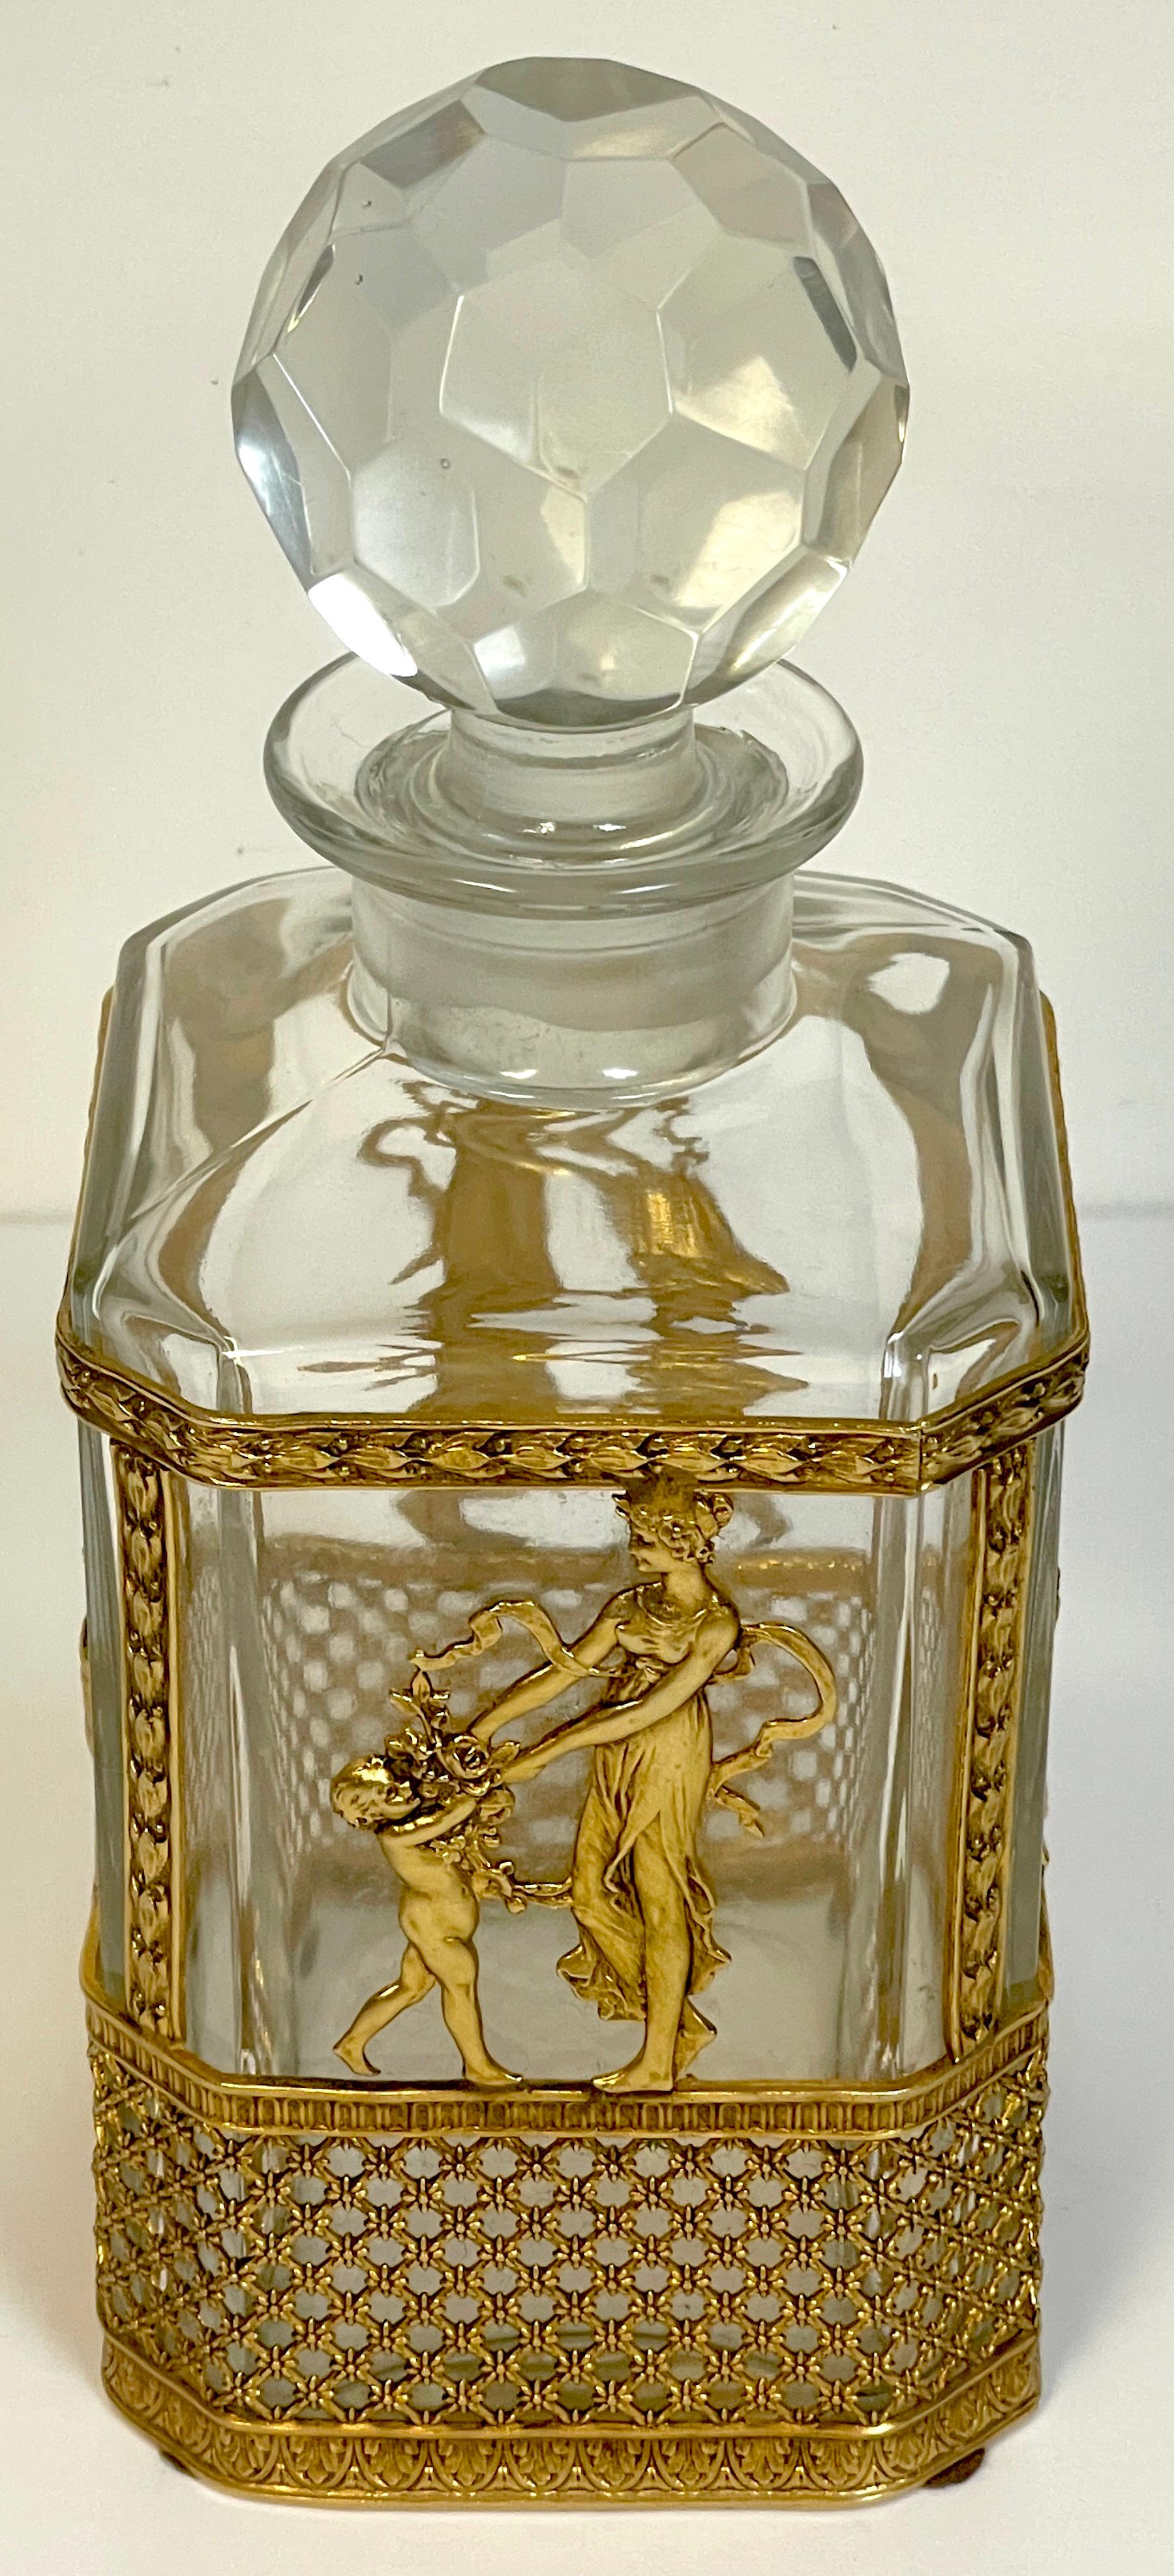 Empire Baccarat Style Ormolu Mounted Decanter For Sale 1